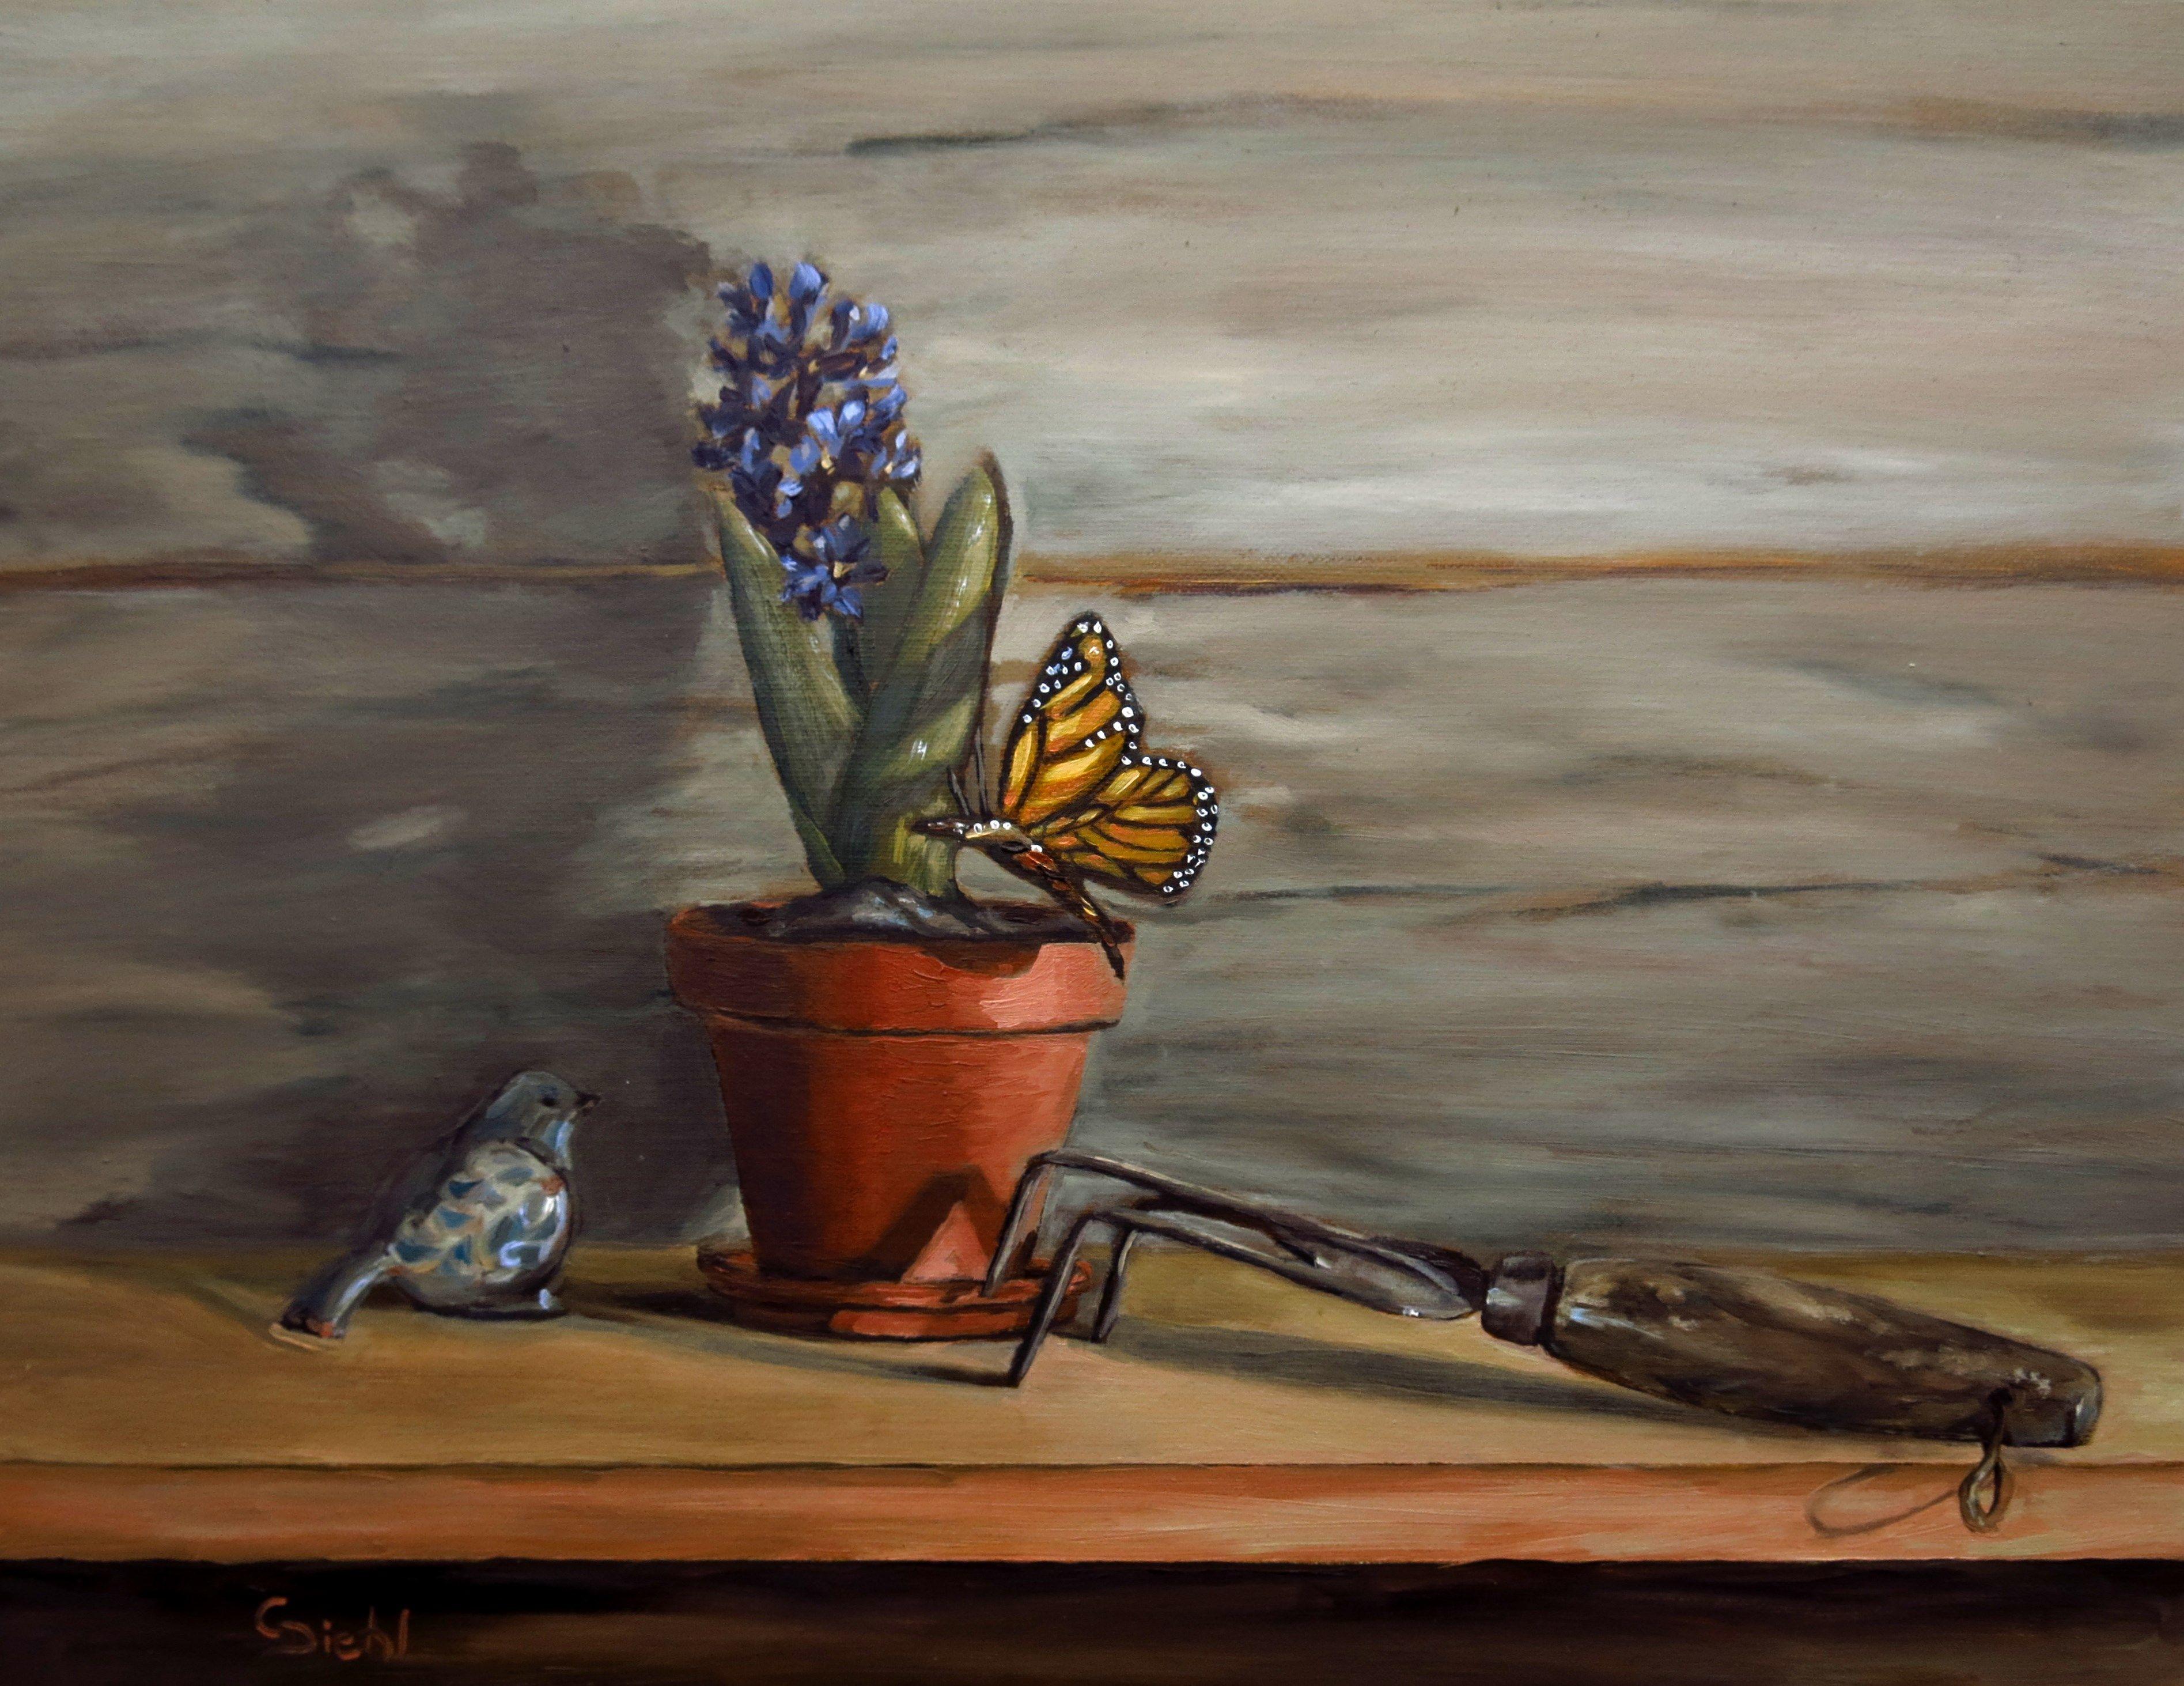 Gardening is the theme in this unique, original oil painting. A potted floral lilac, a ceramic bird, a butterfly and a gardening tool are objects featured in this still life artwork. This fine artwork has been created in oils on a 11"x14" support.